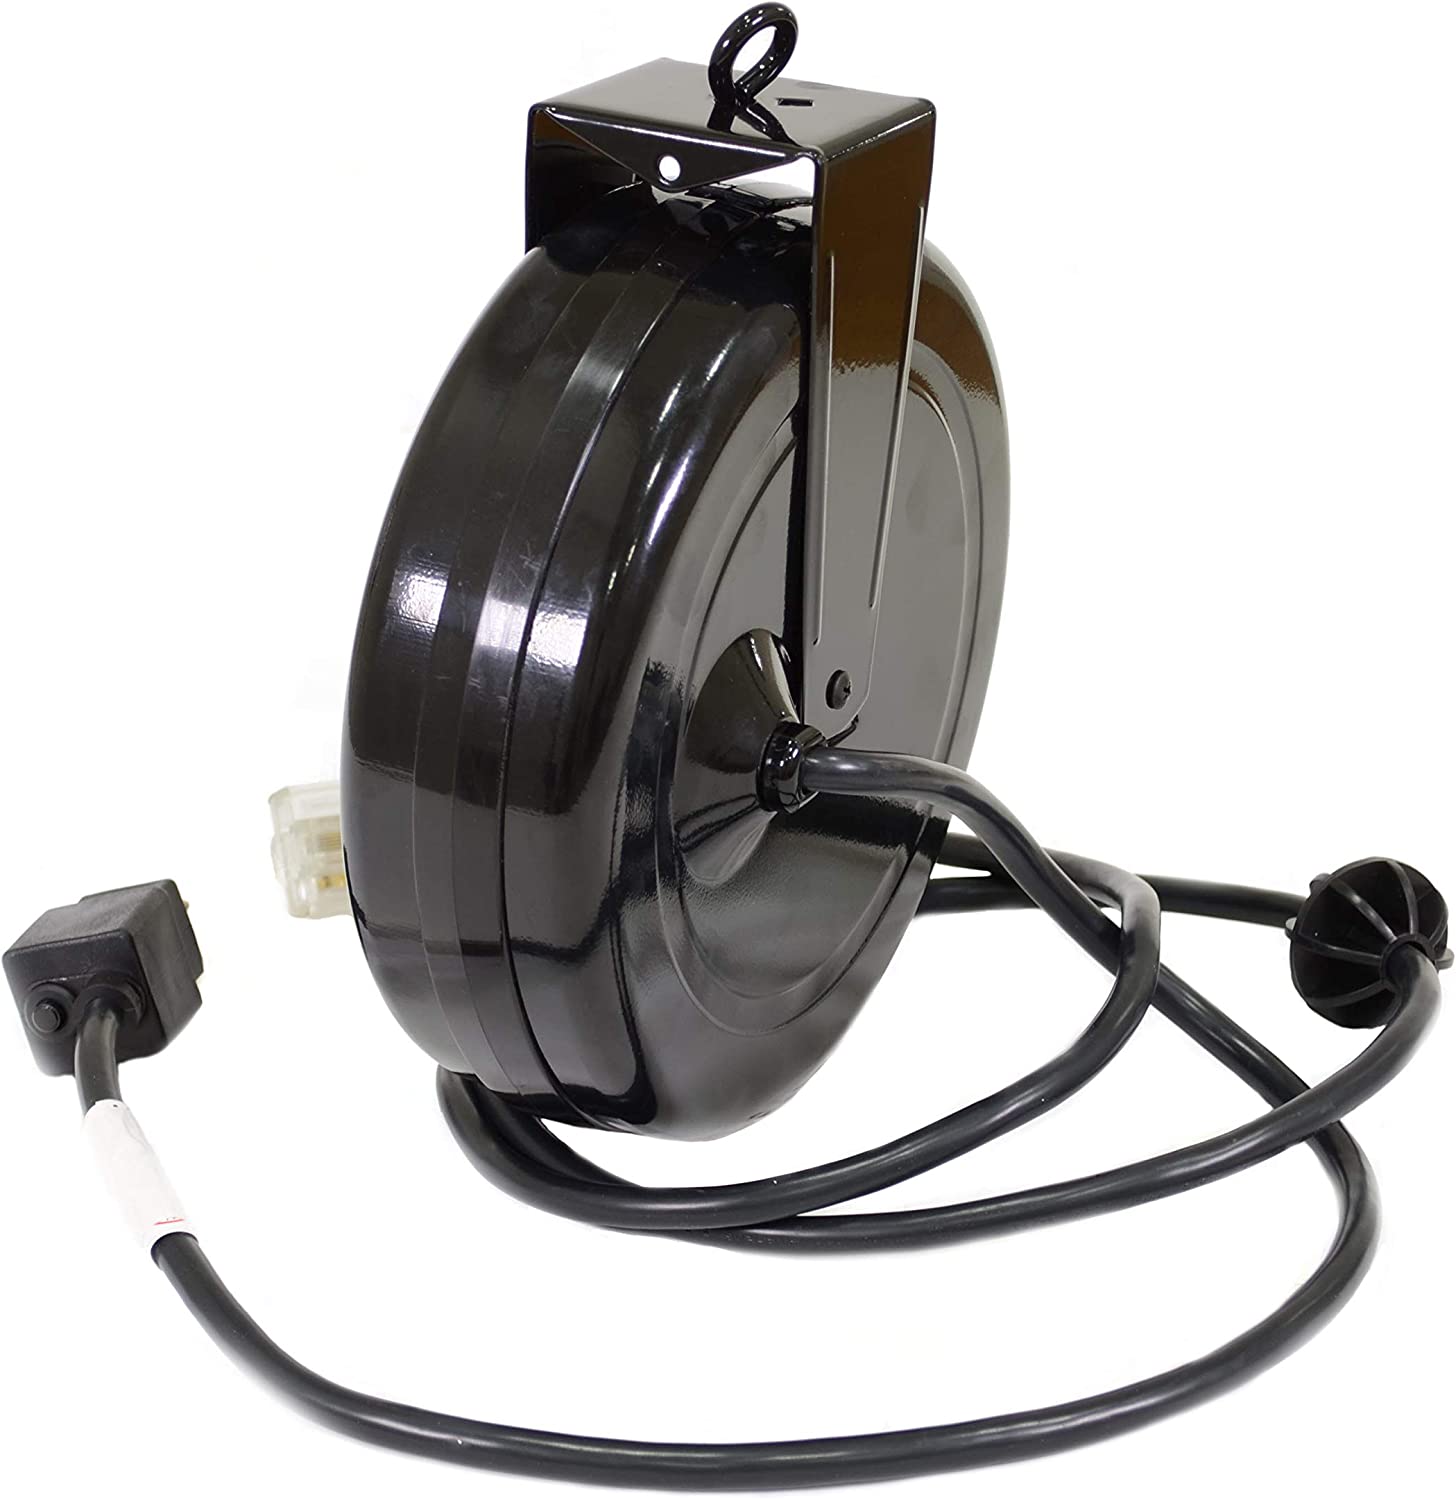 Alert Stamping 5020tfc 20' Retractable Extension Cord Reel with Single Outlet